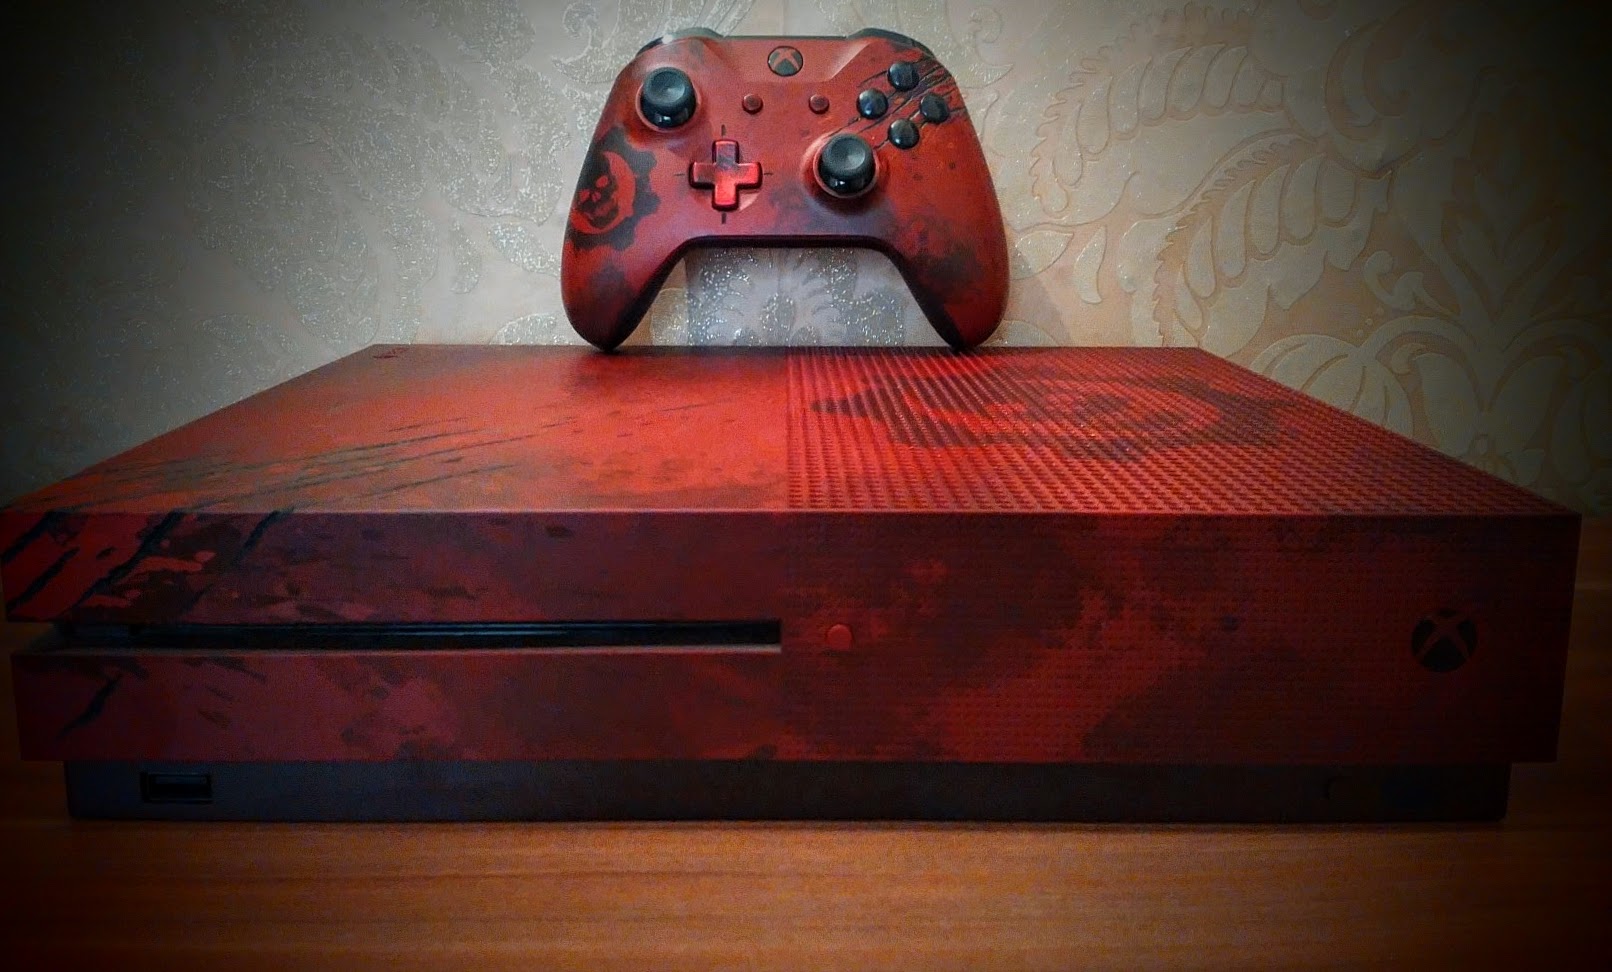 Xbox One S Gears of War 4 Limited Edition Review